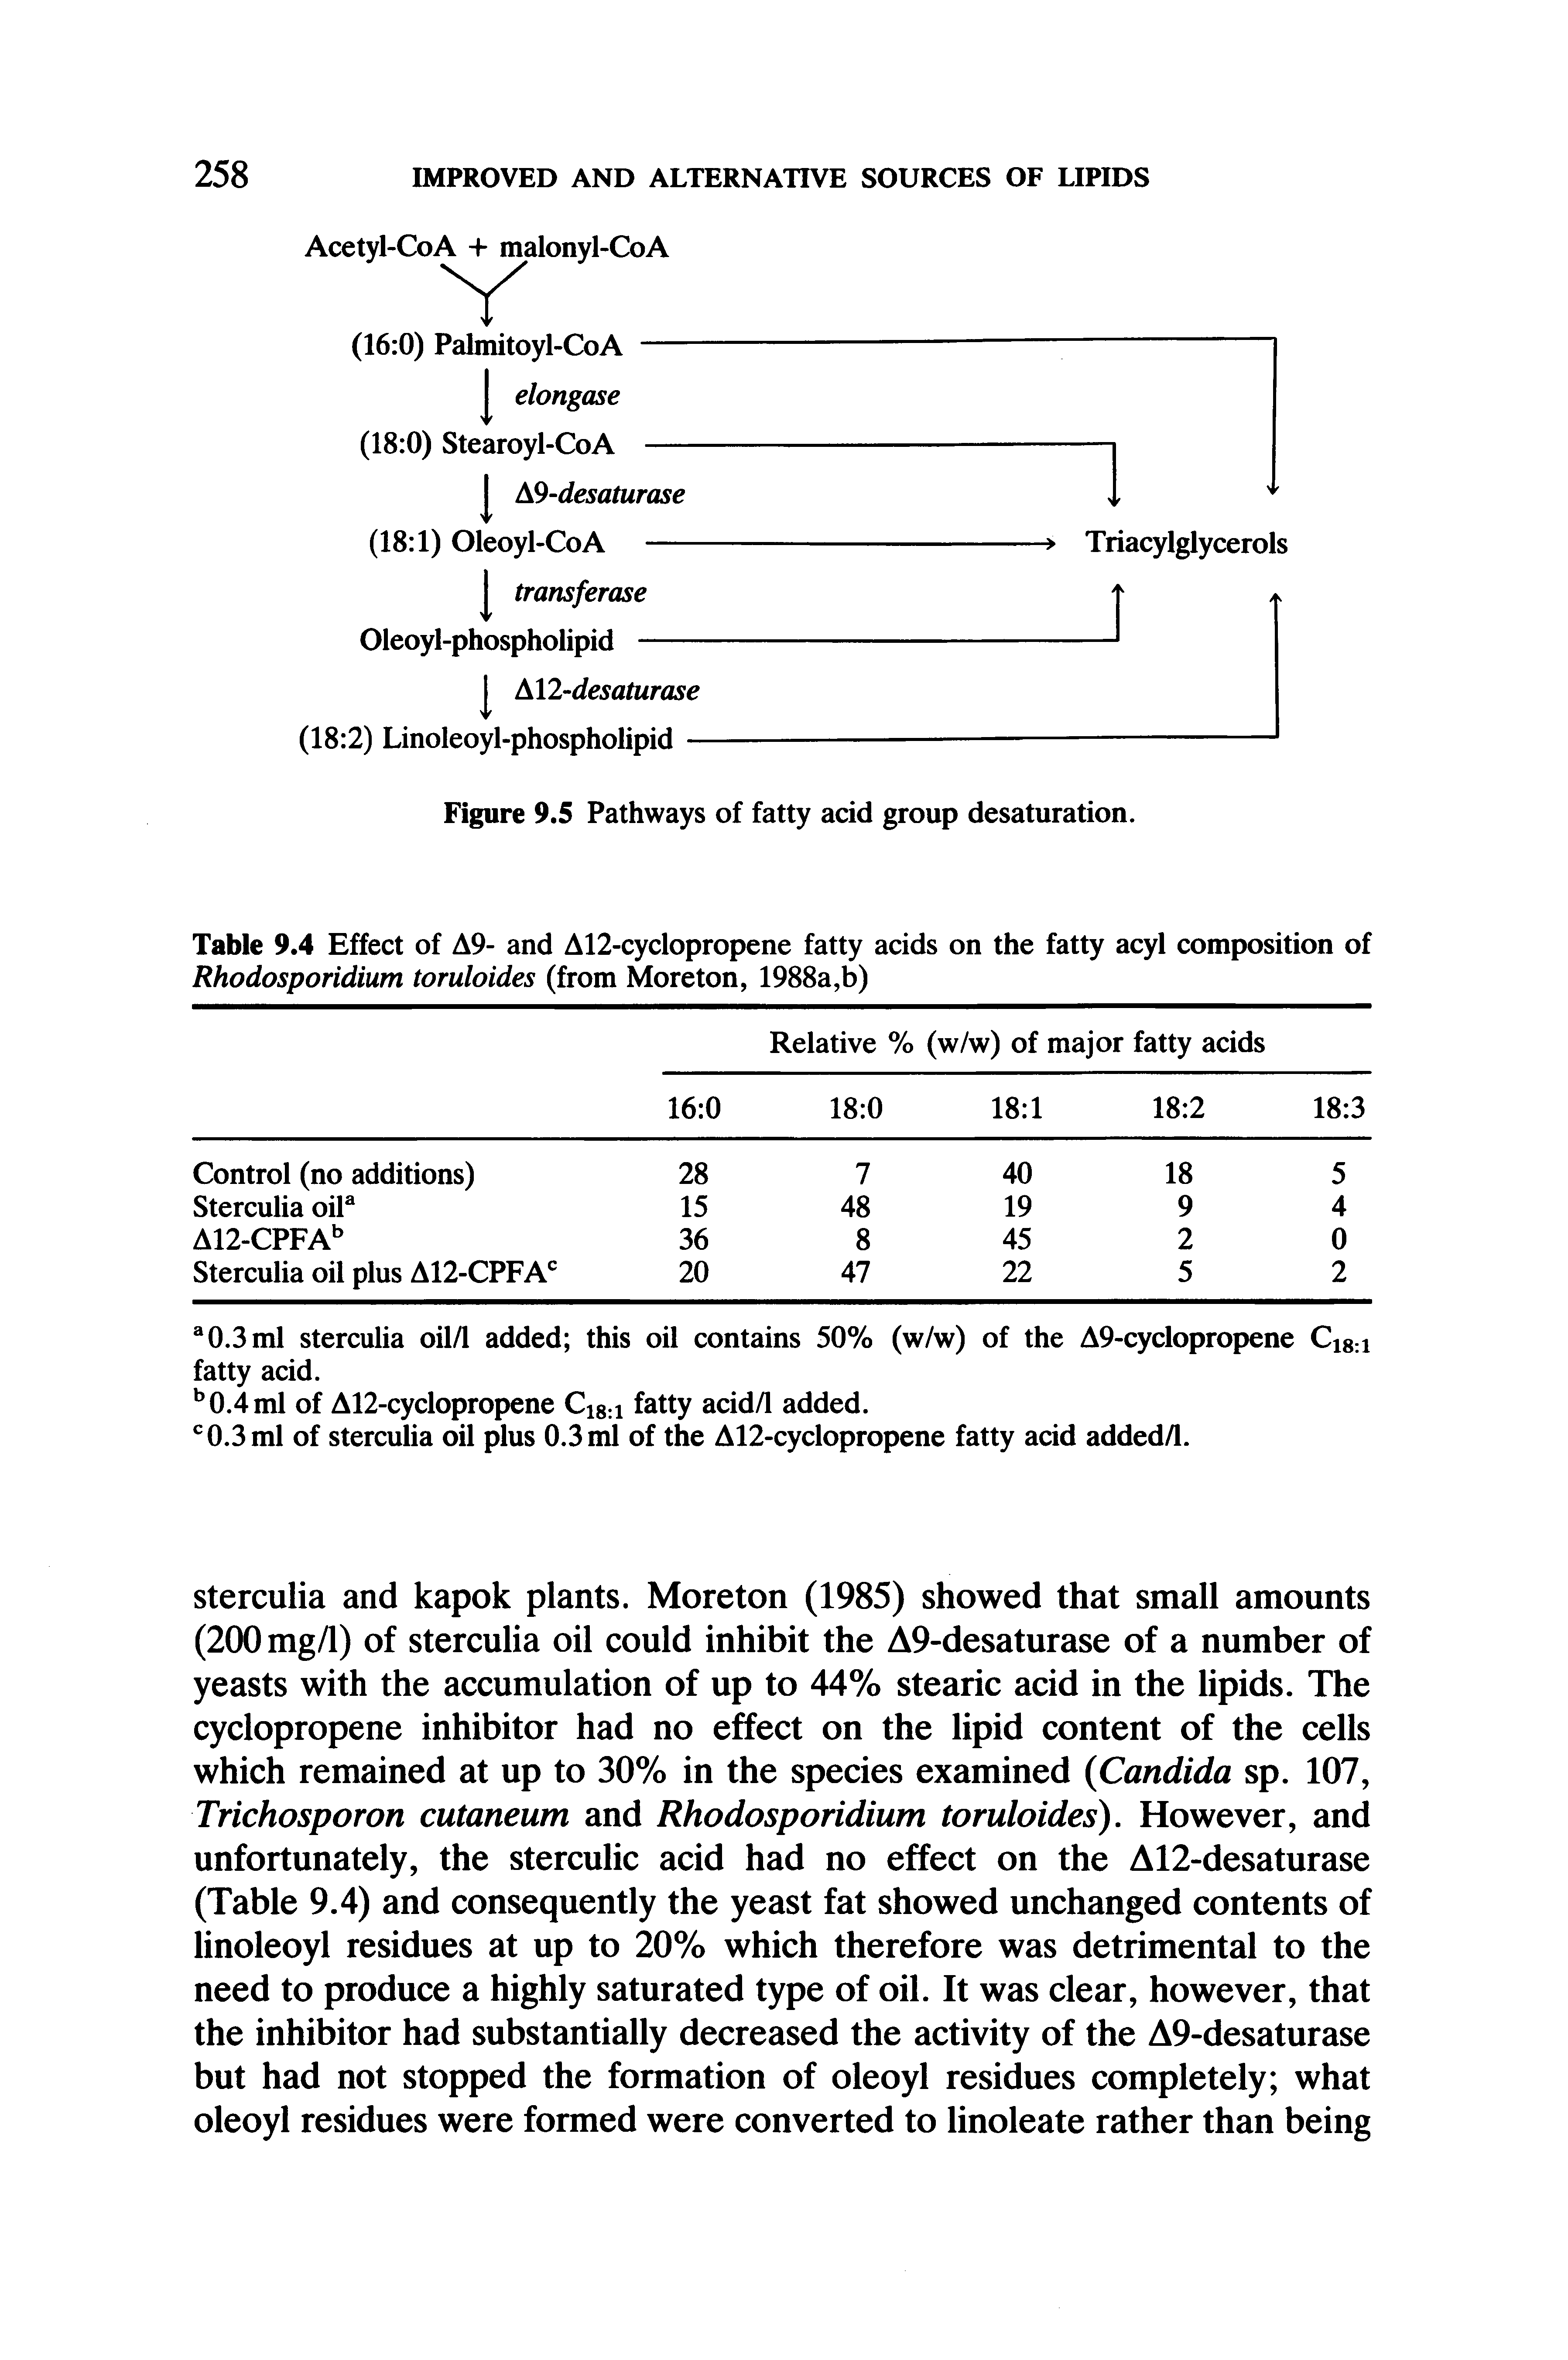 Table 9.4 Effect of A9- and A12-cyclopropene fatty acids on the fatty acyl composition of Rhodosporidium toruloides (from Moreton, 1988a,b)...